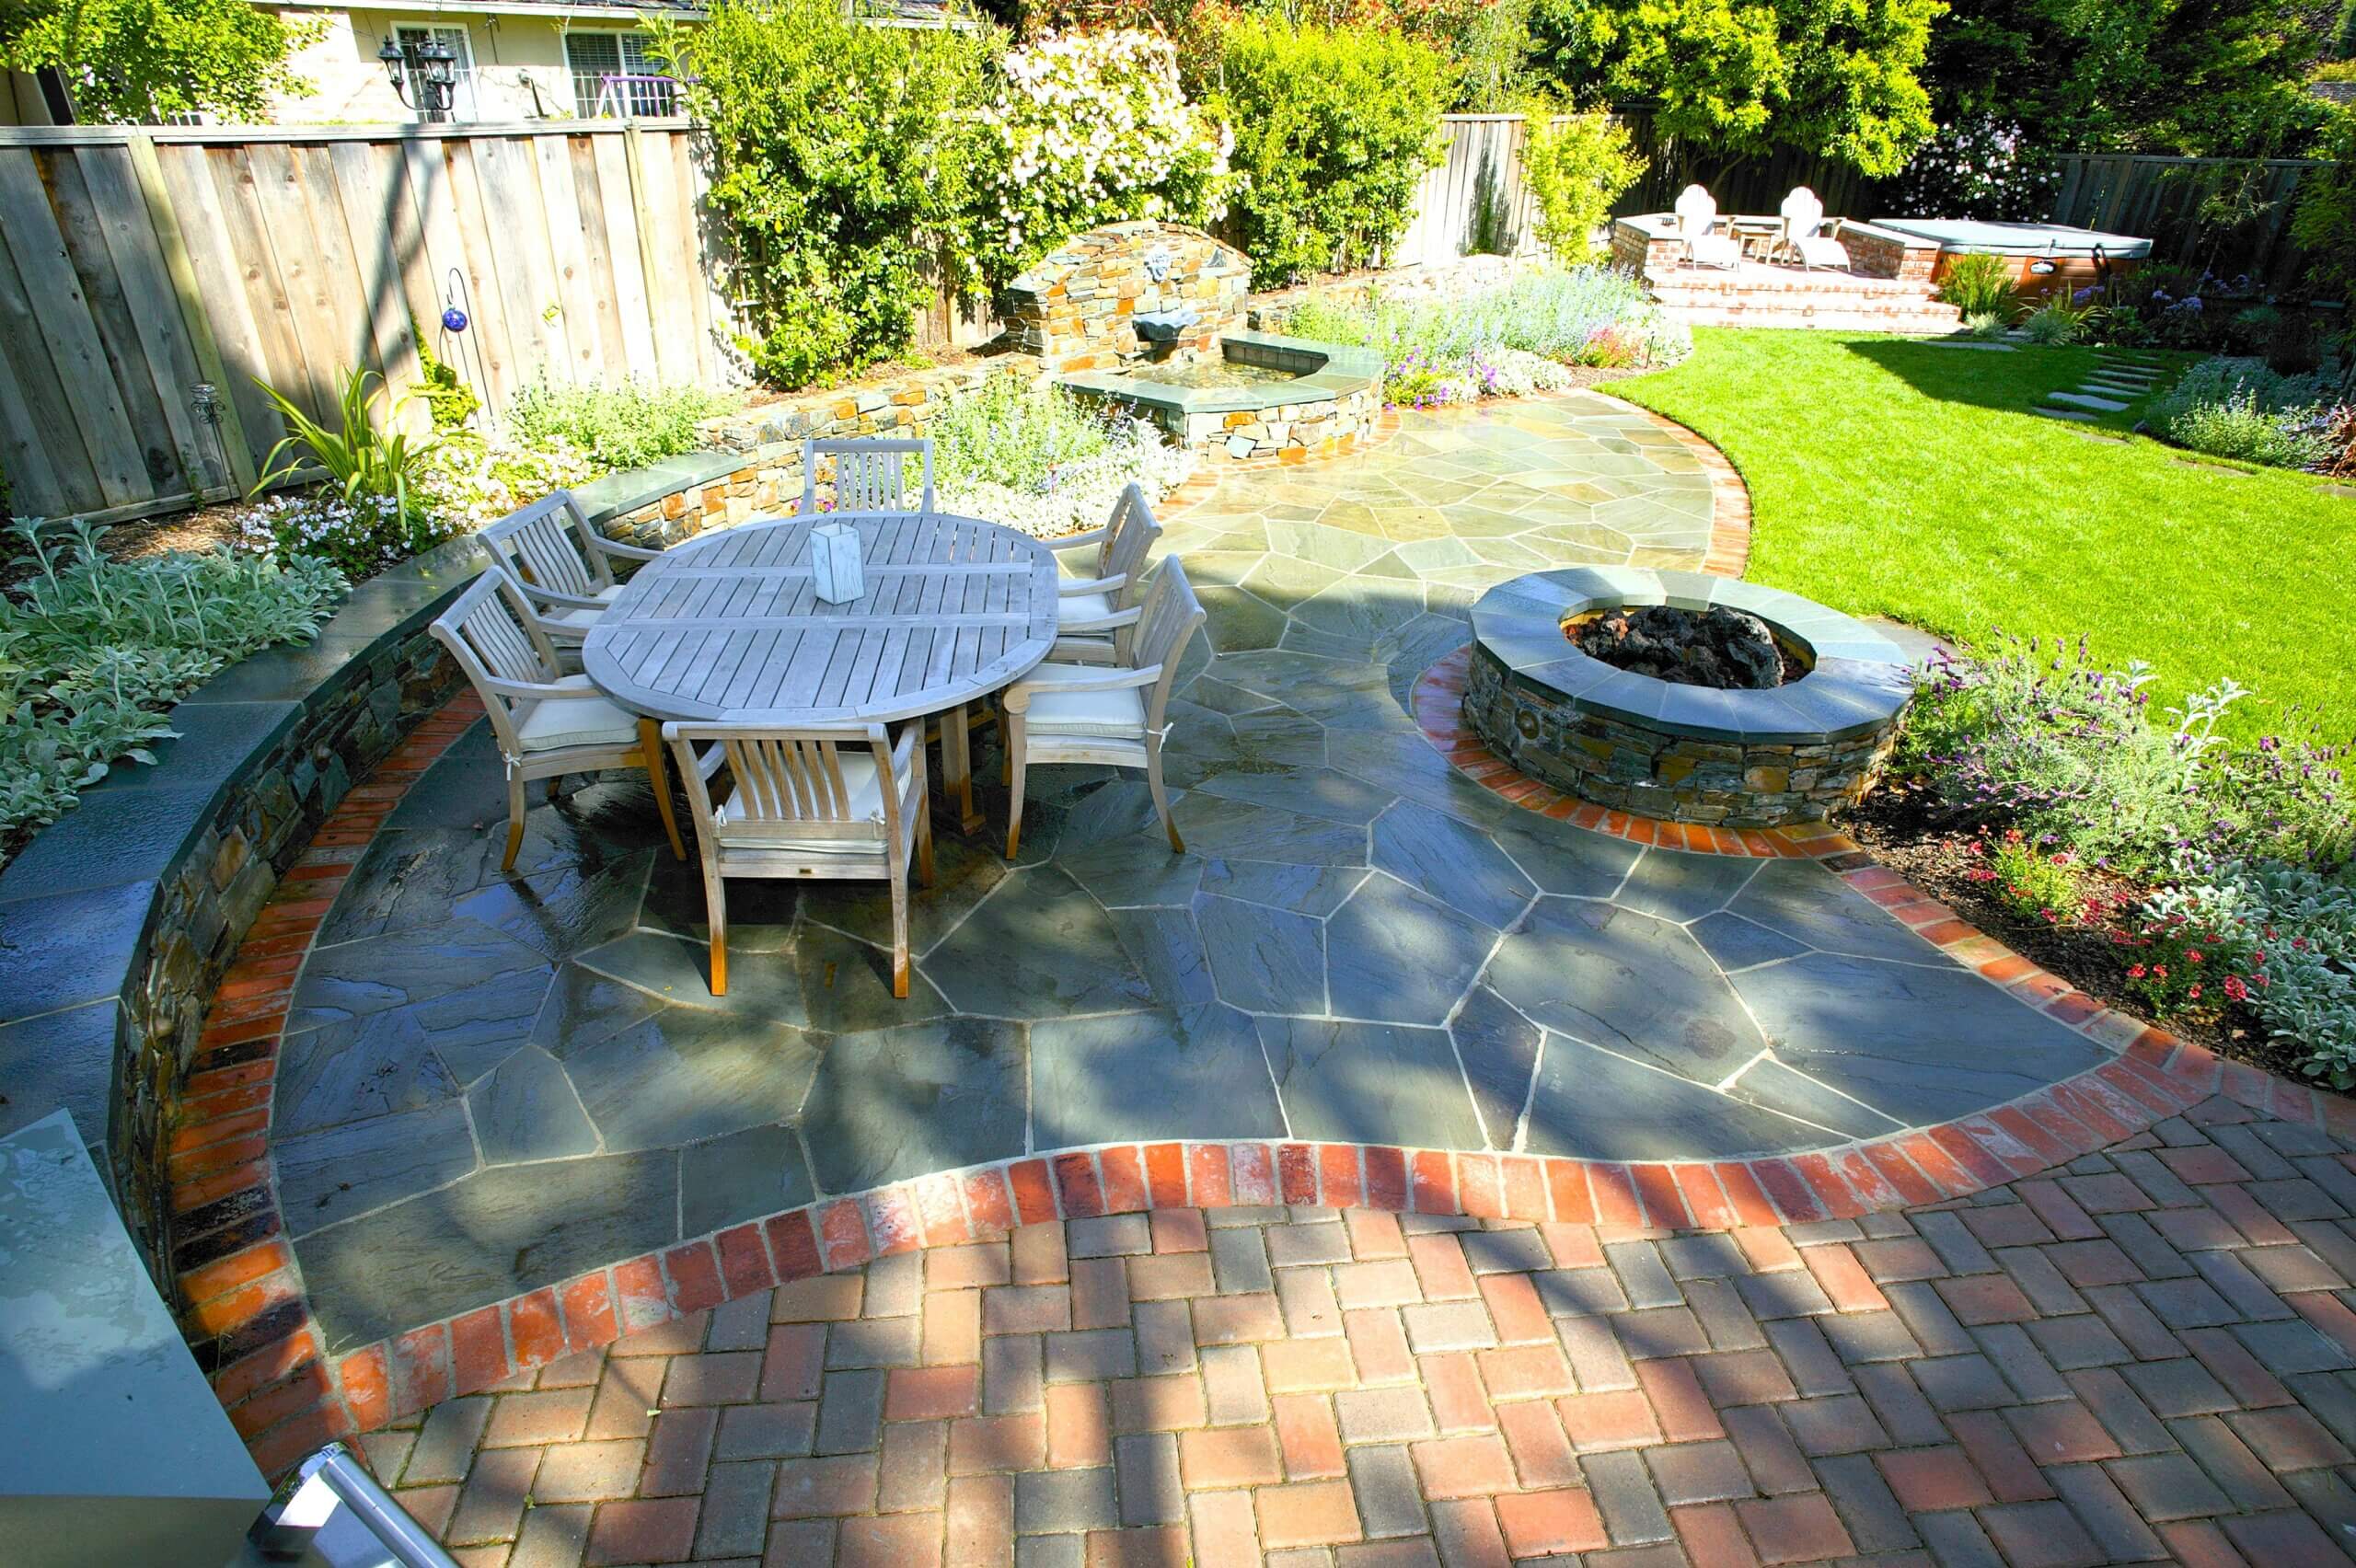 Decorative curved patio made from stone and brick